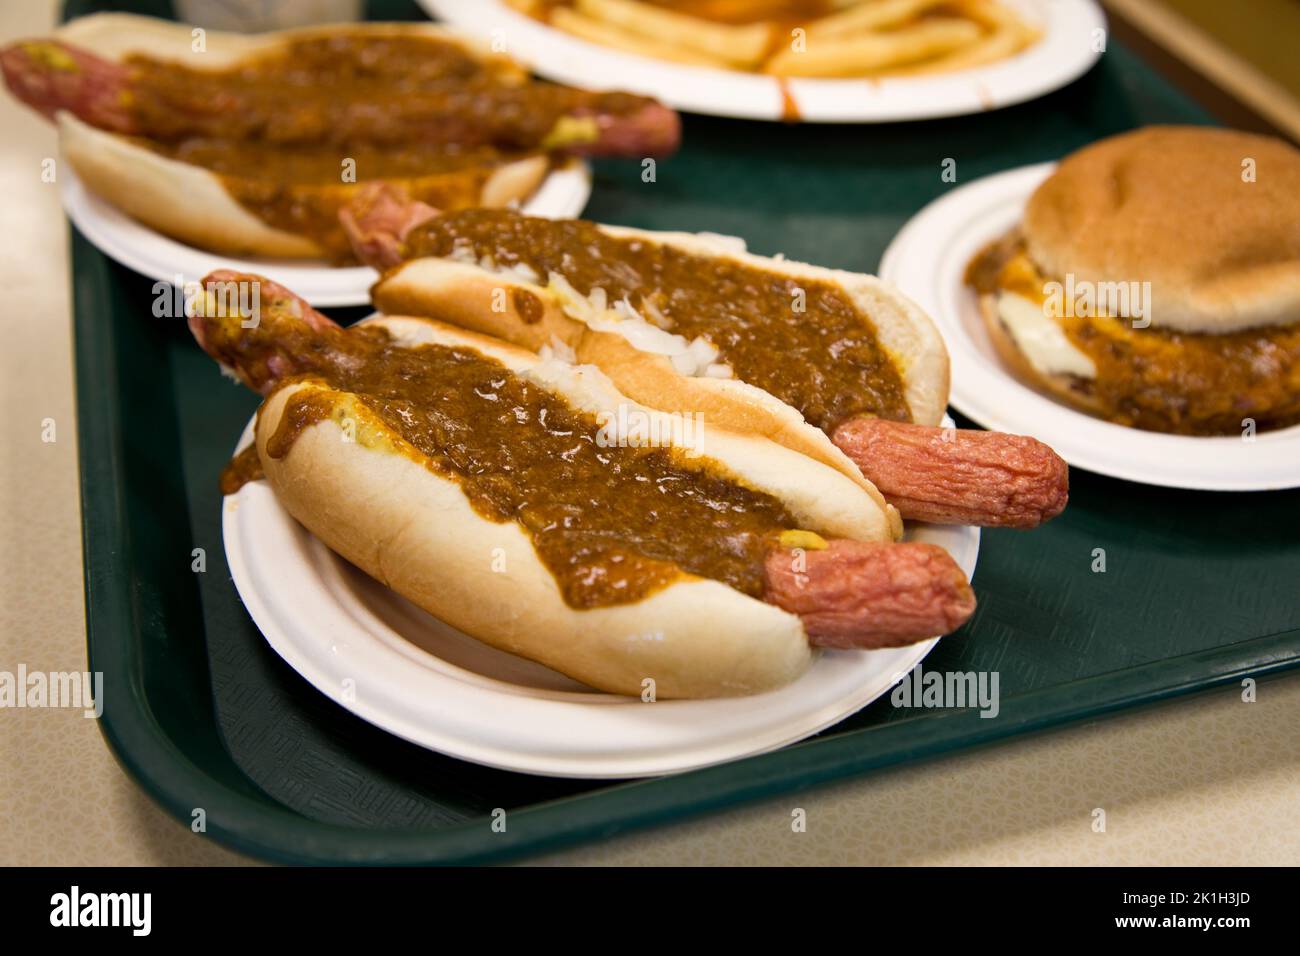 Fast food American style, hamburger, hot dogs, and French fries on a tray. Stock Photo